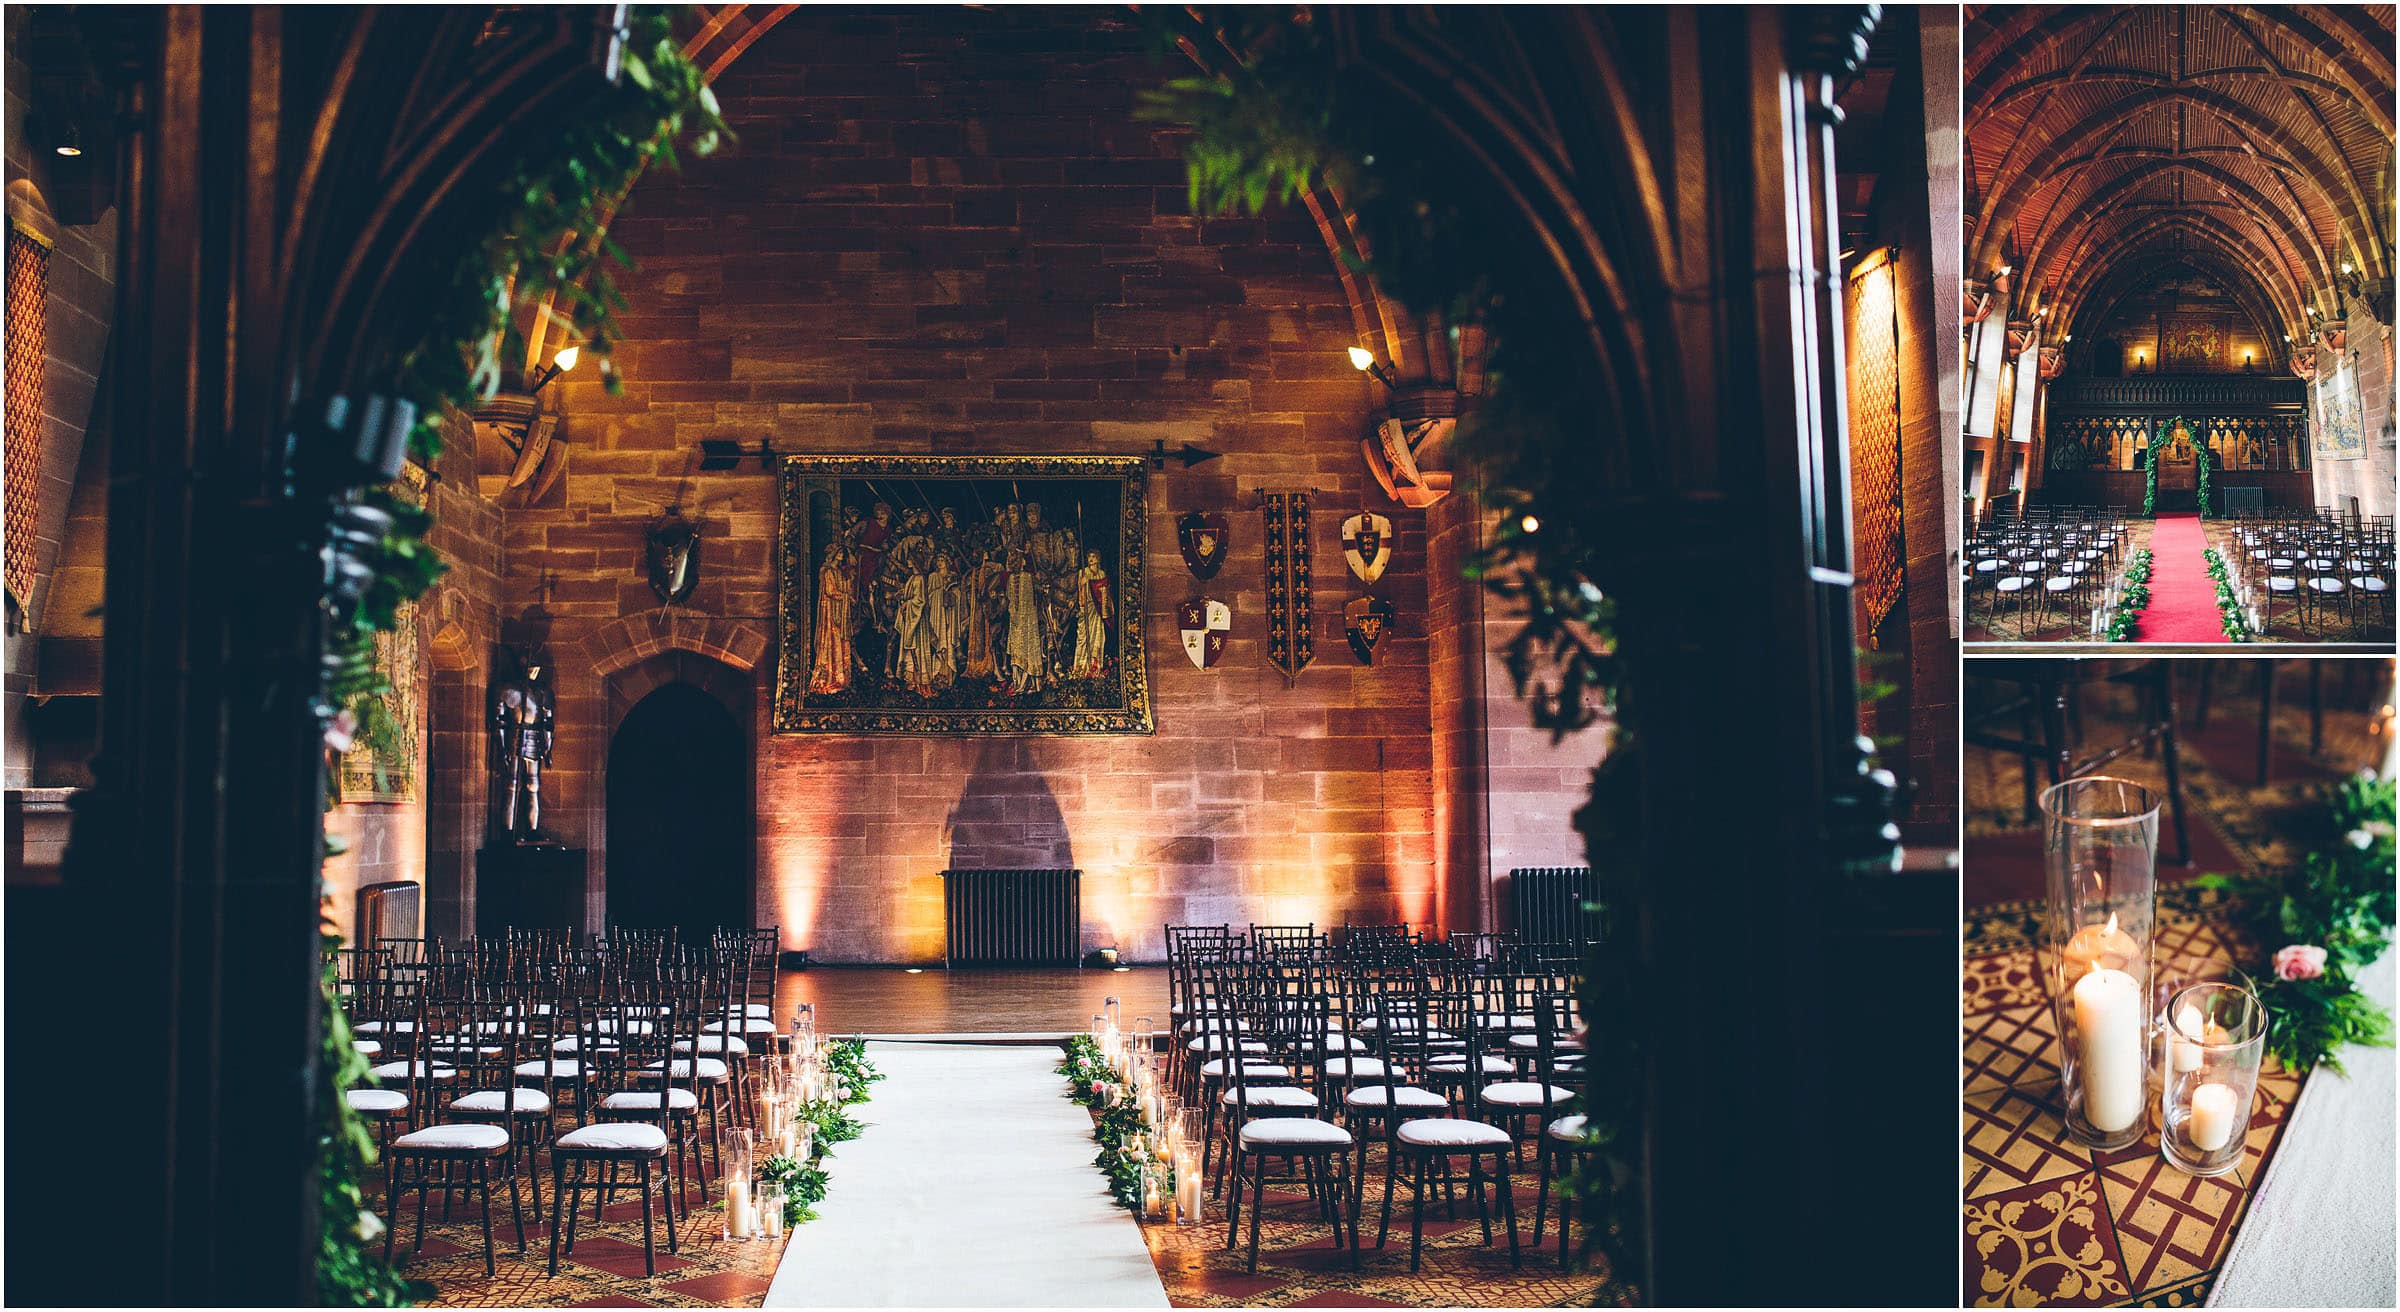 Peckforton Castle set up ready to welcome guests to a traditional English wedding